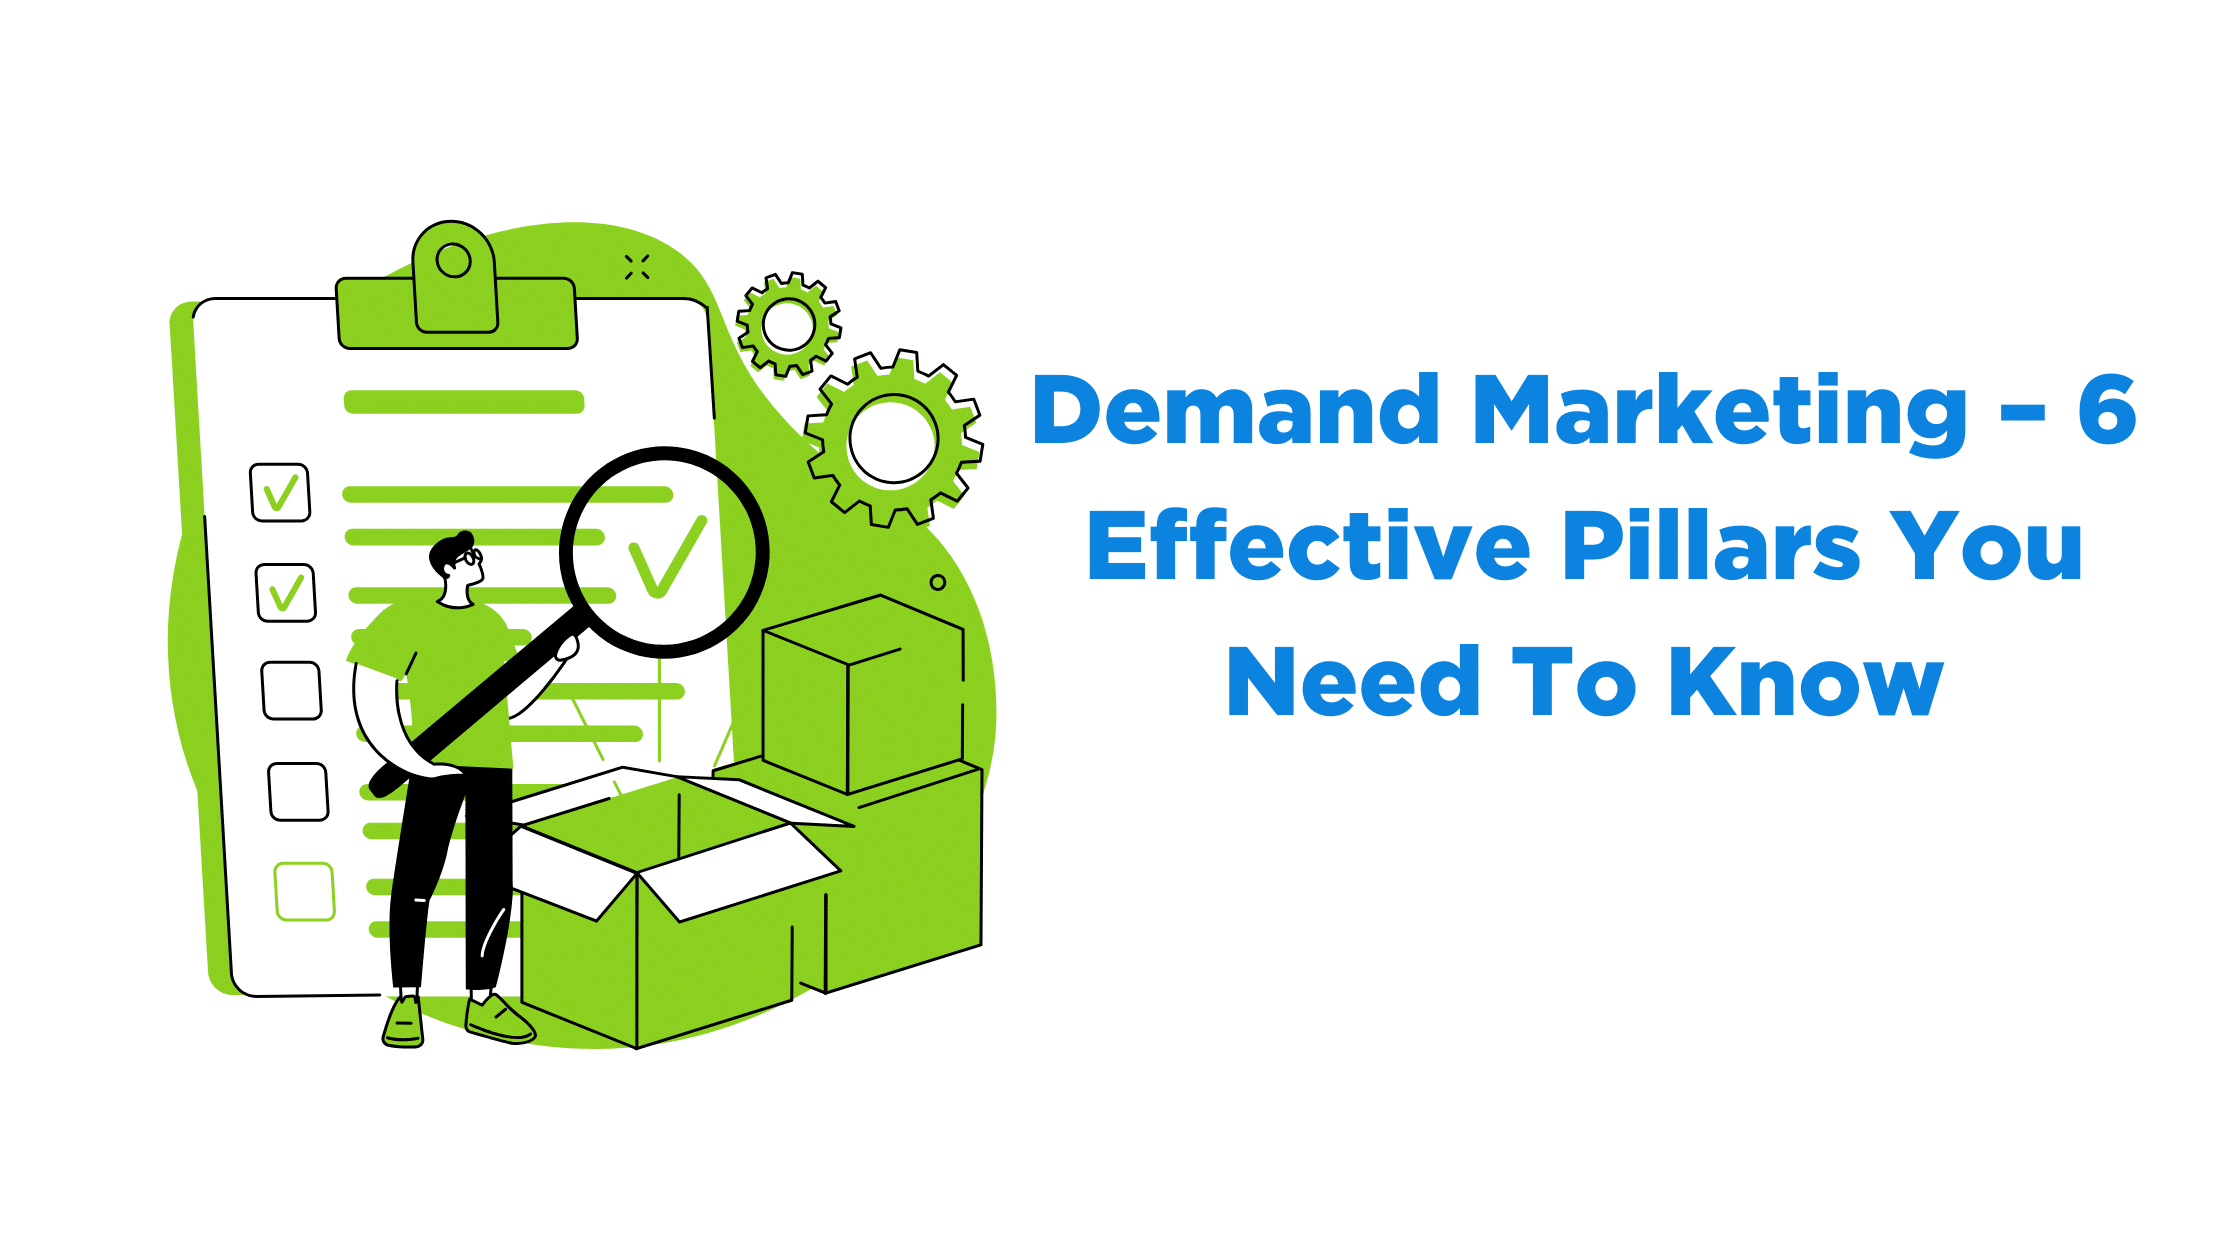 Demand Marketing – 6 Effective Pillars You Need To Know